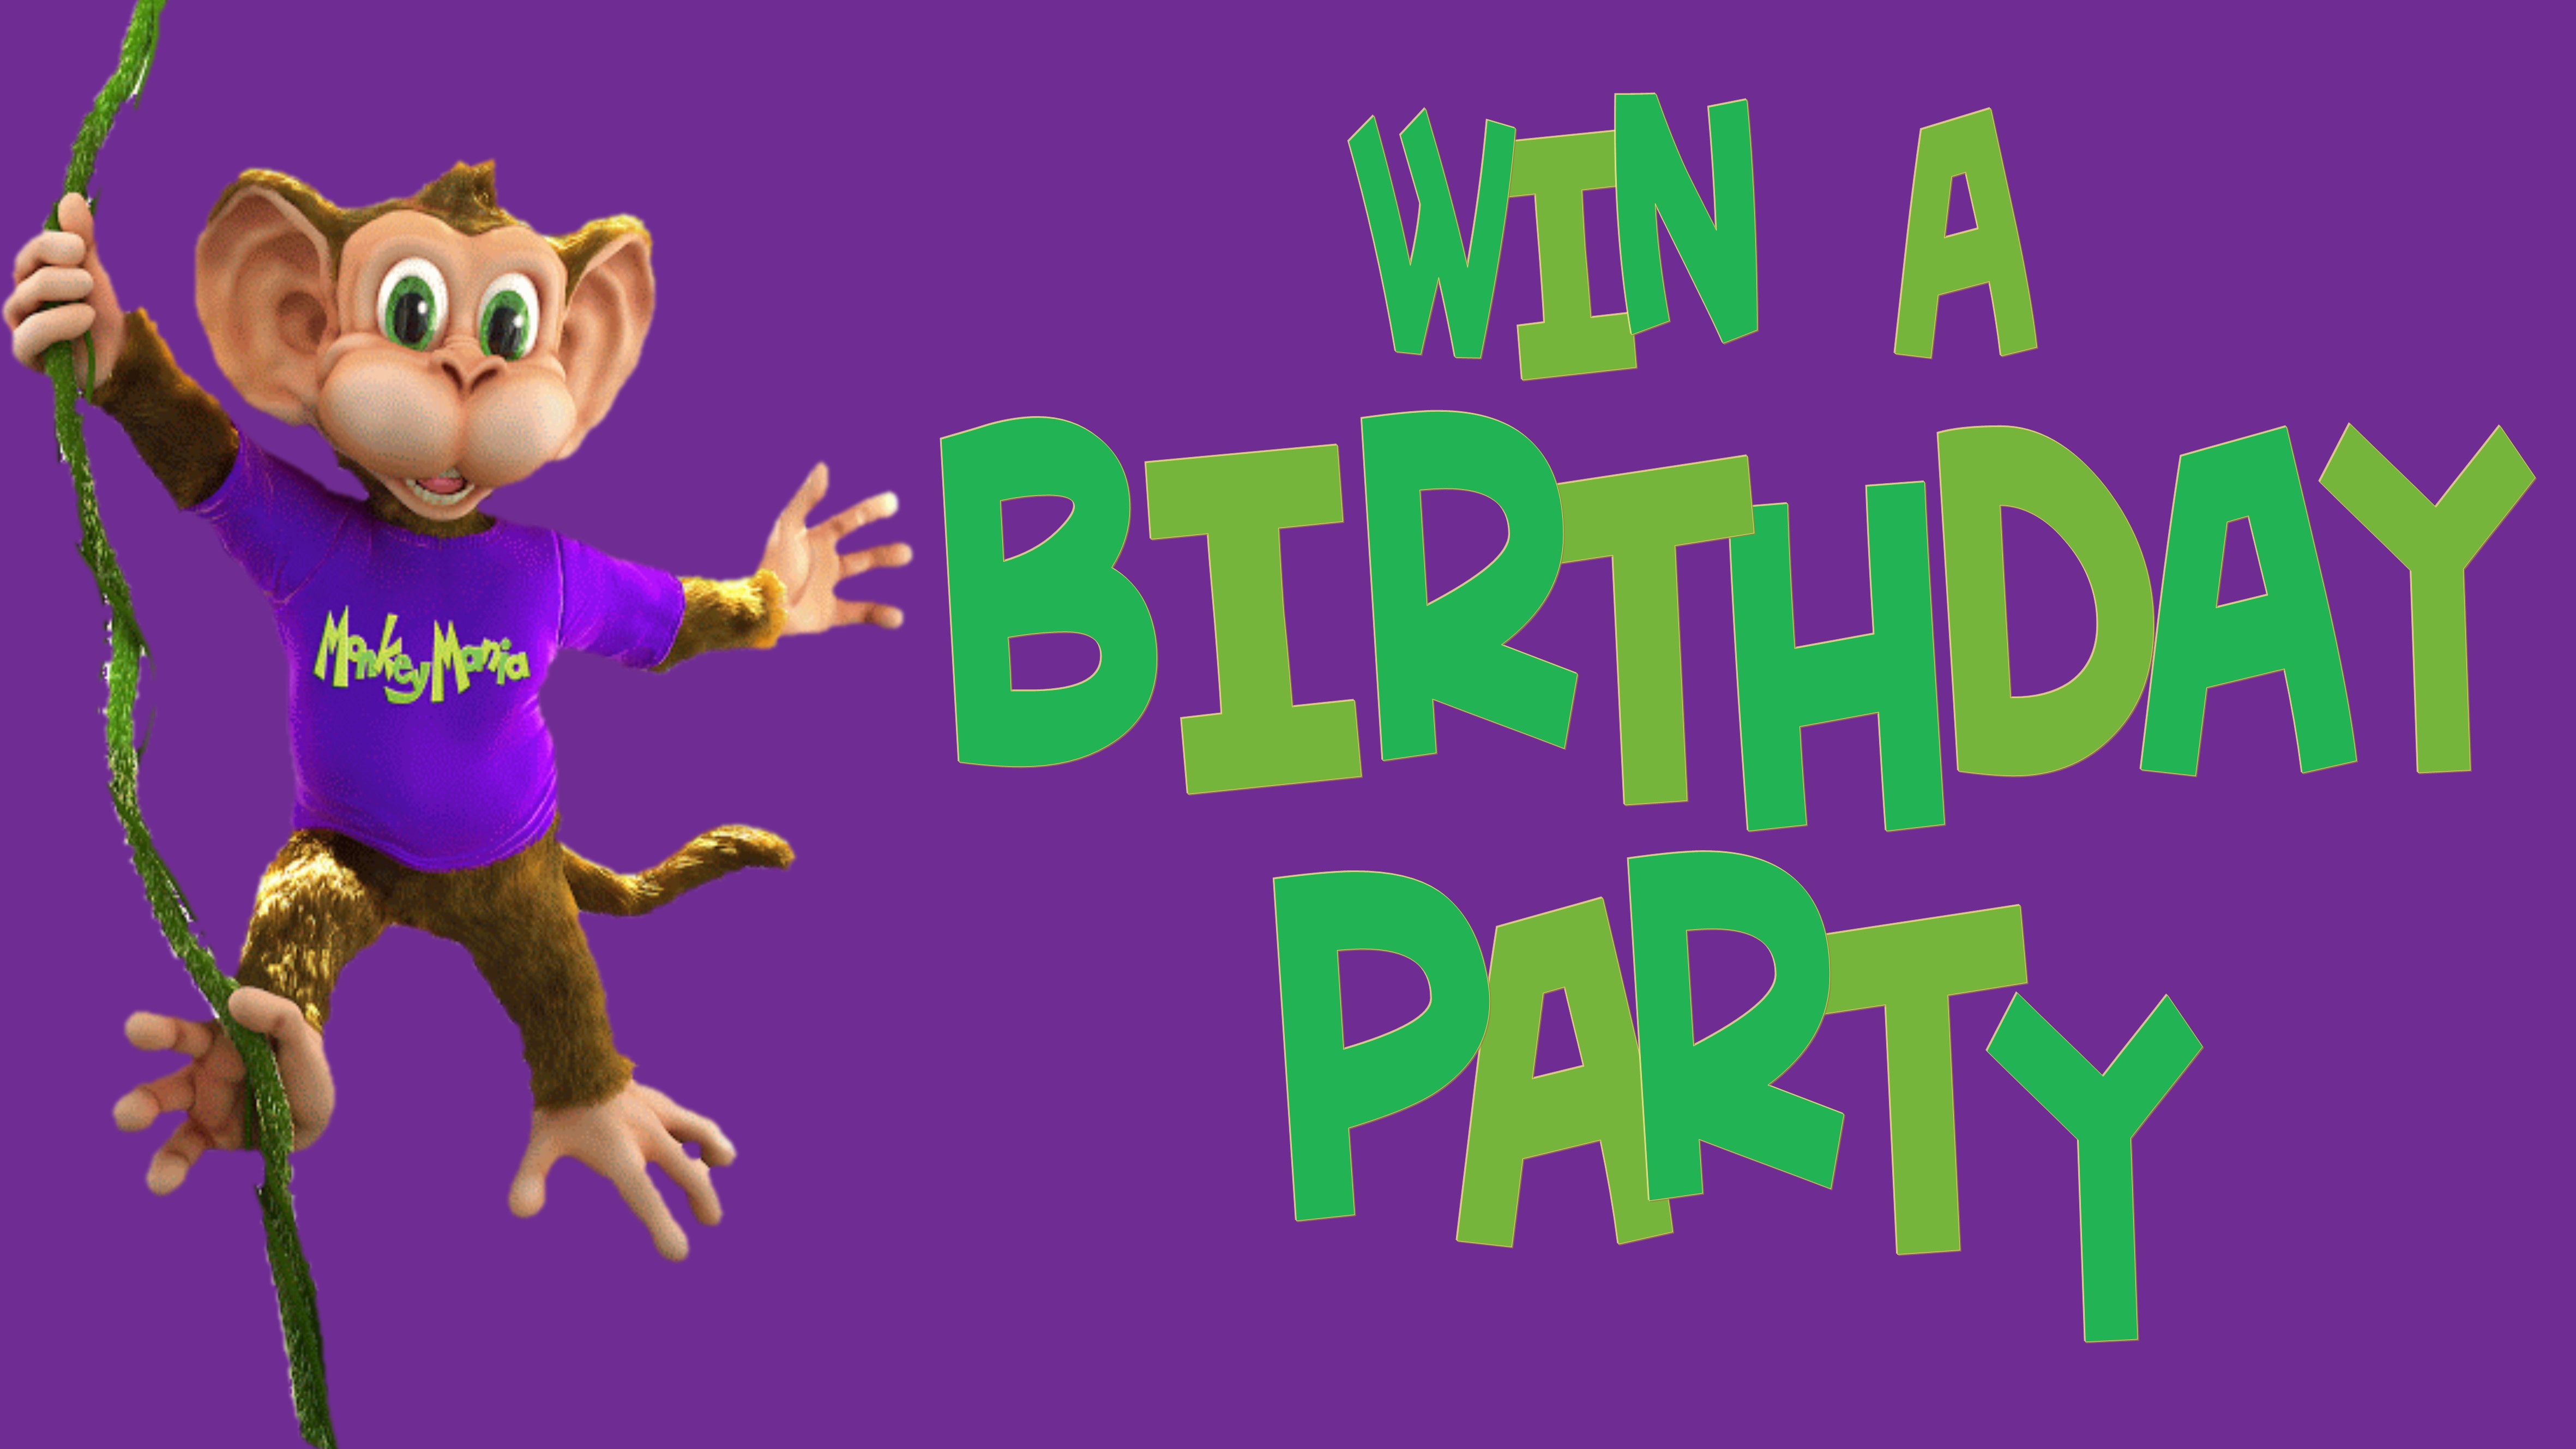 WIN A PARTY SLIDER 1